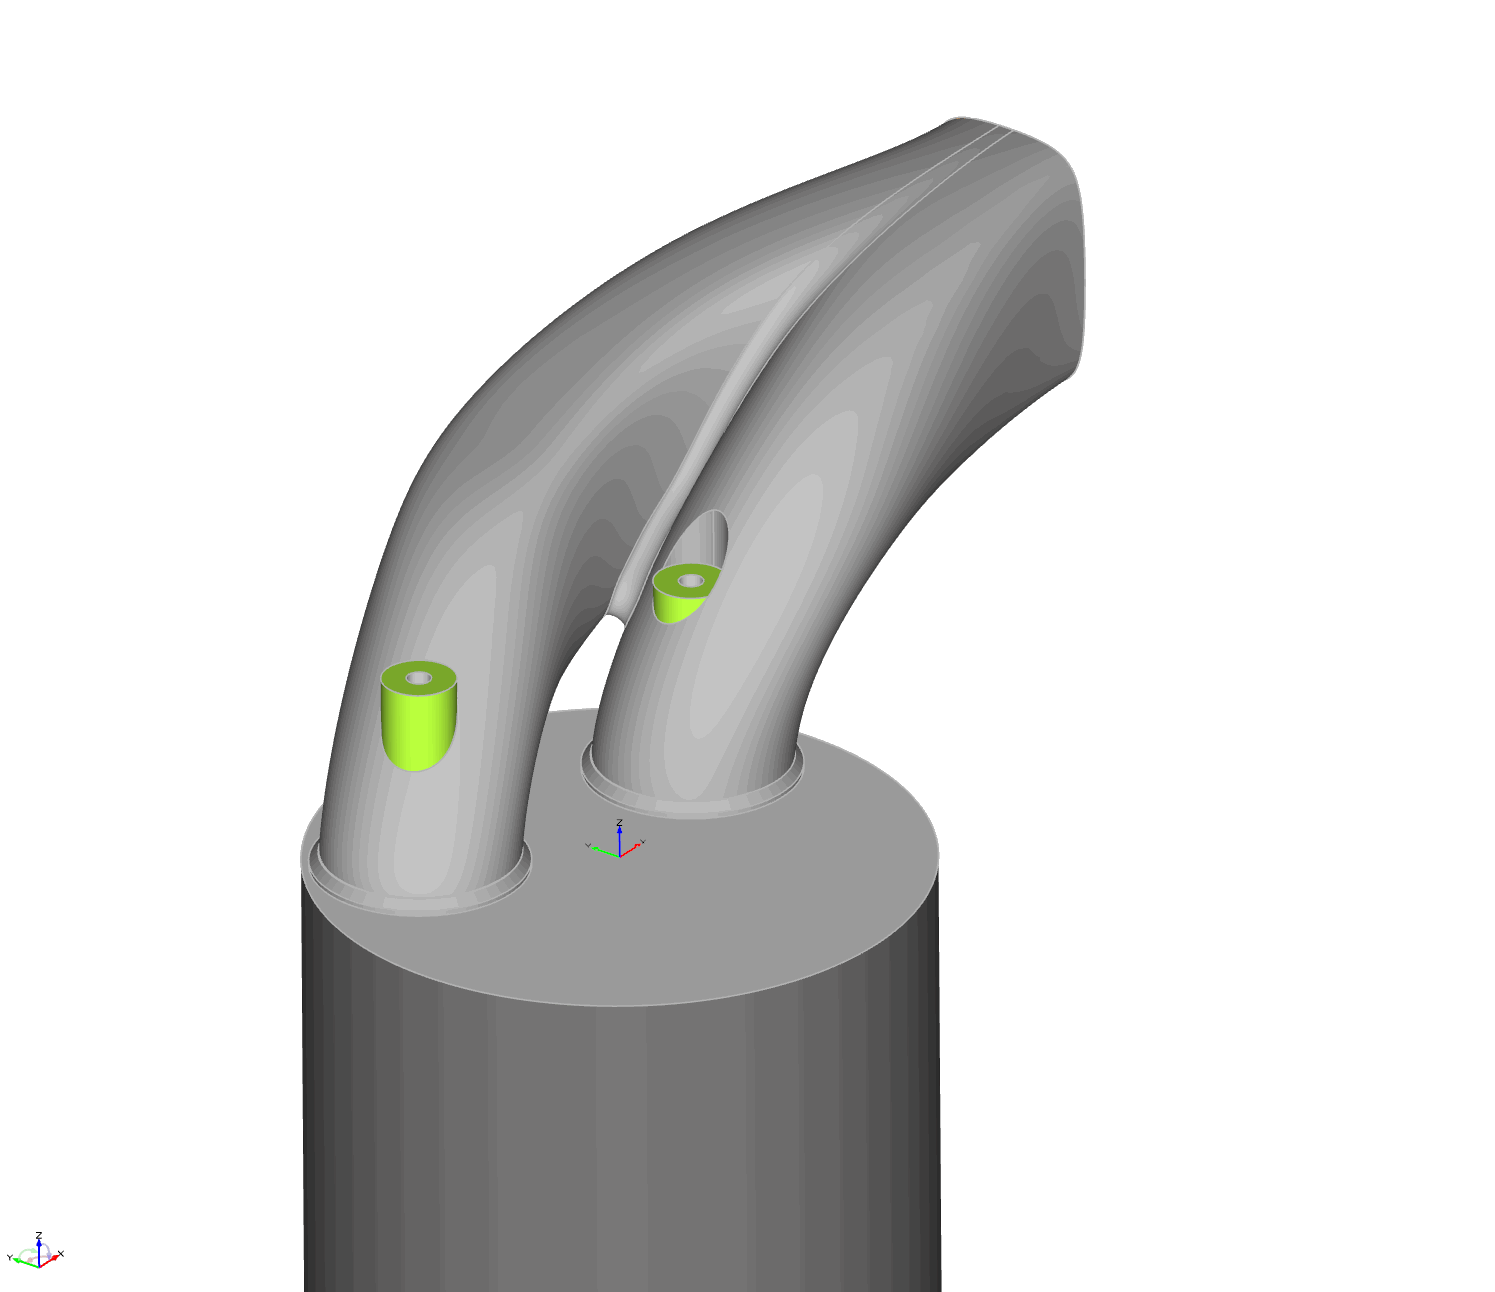 CONVERGE CFD software automation with CAESES - intake port study